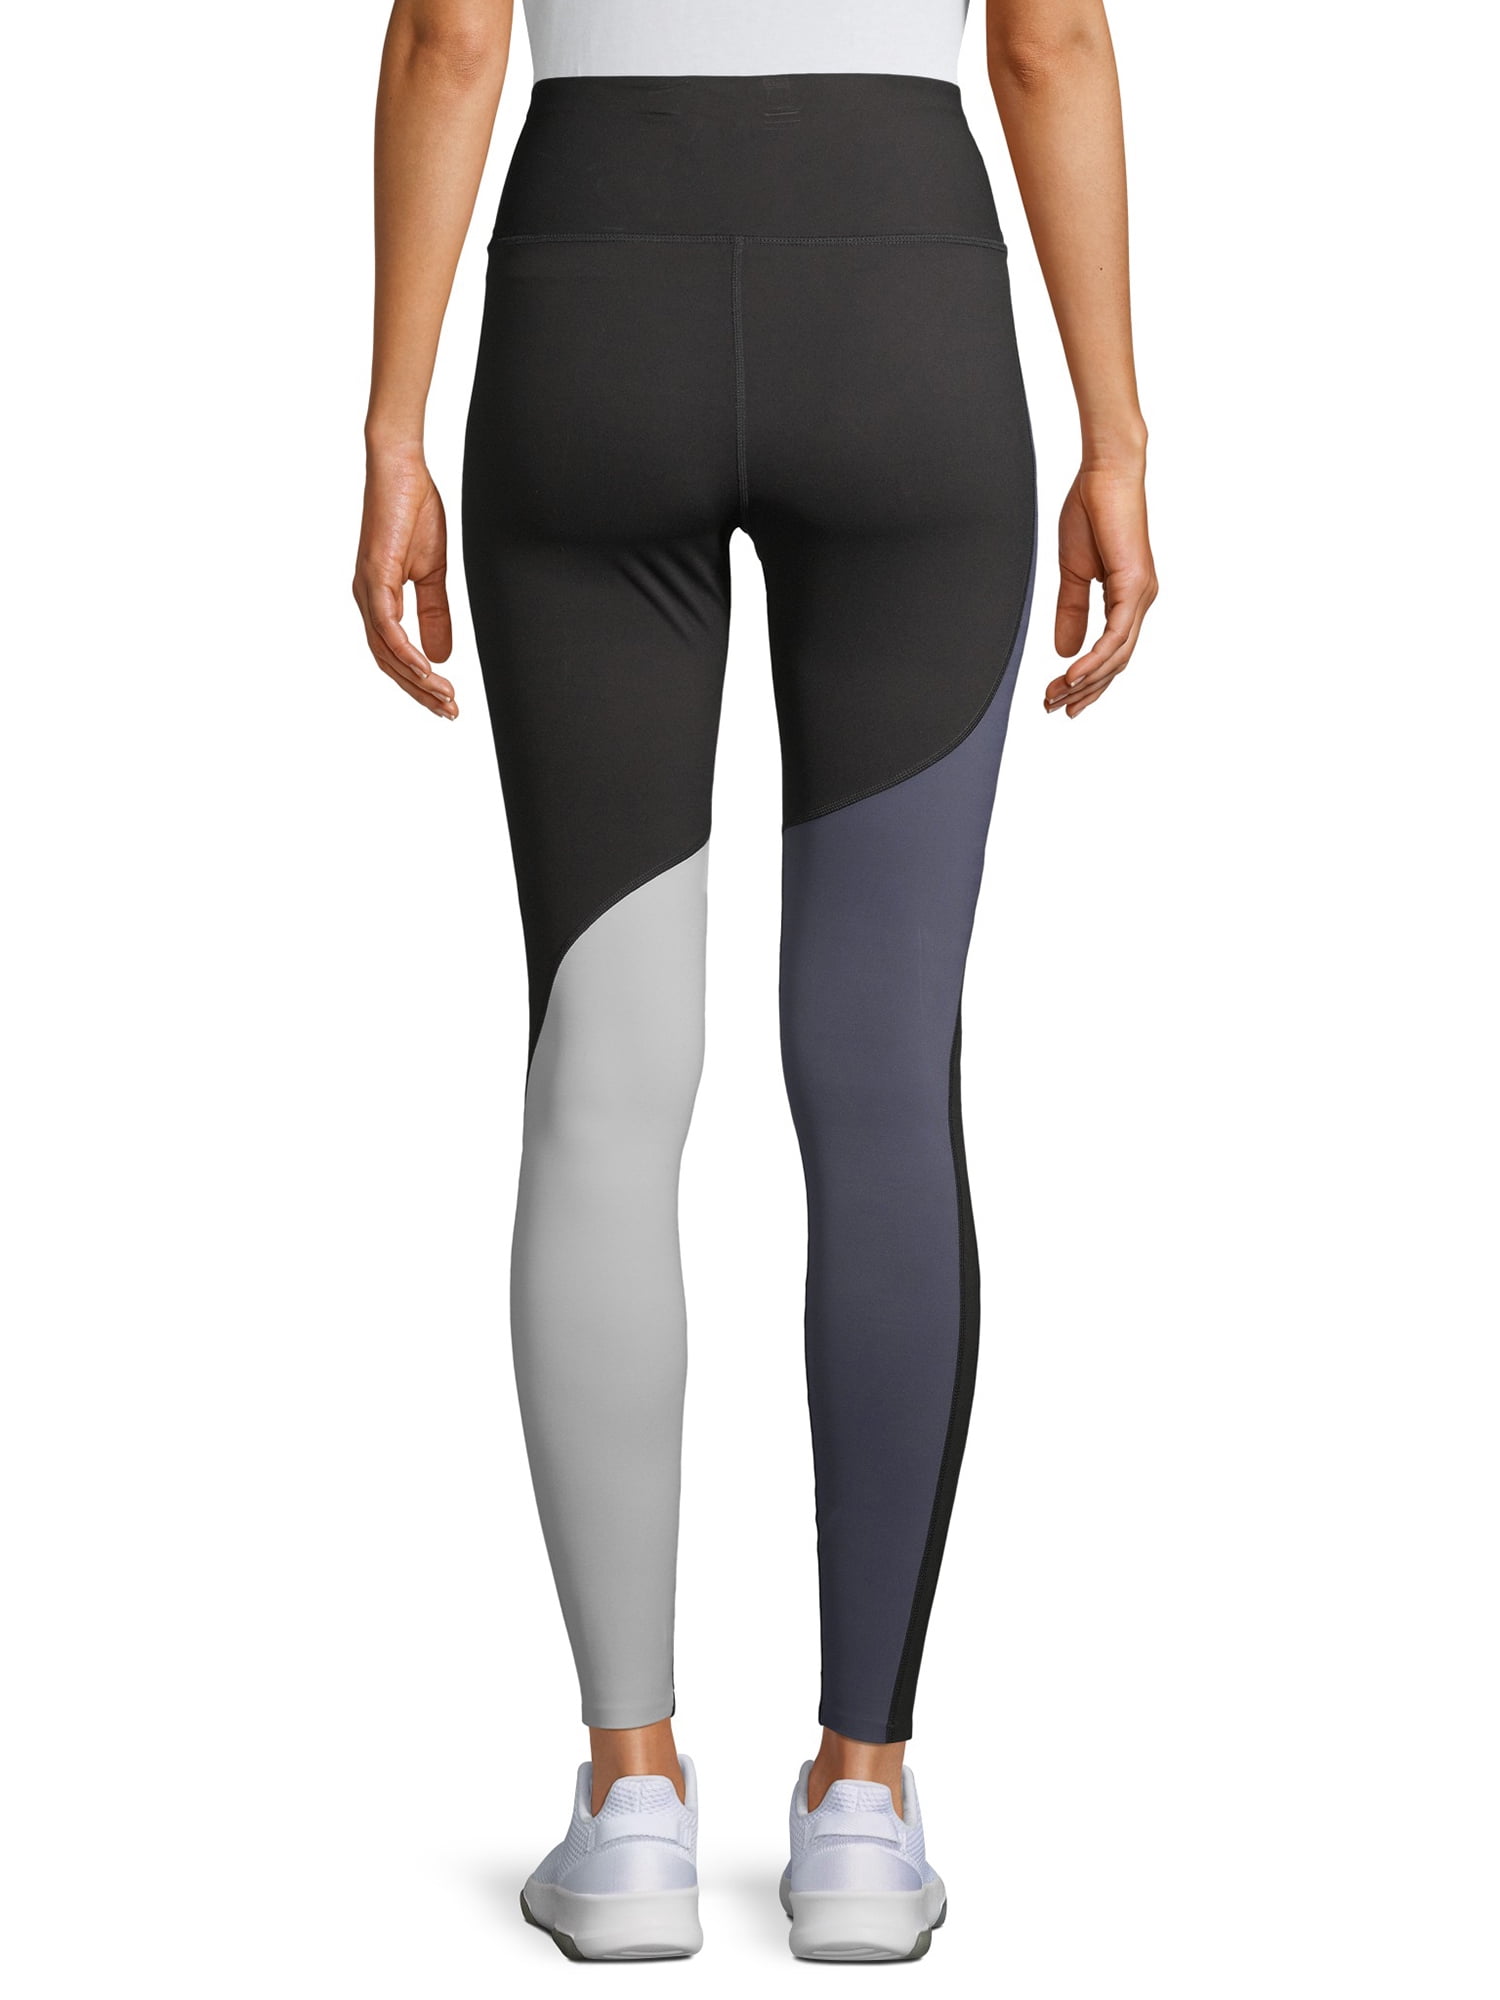 The Best Compression Leggings for Running